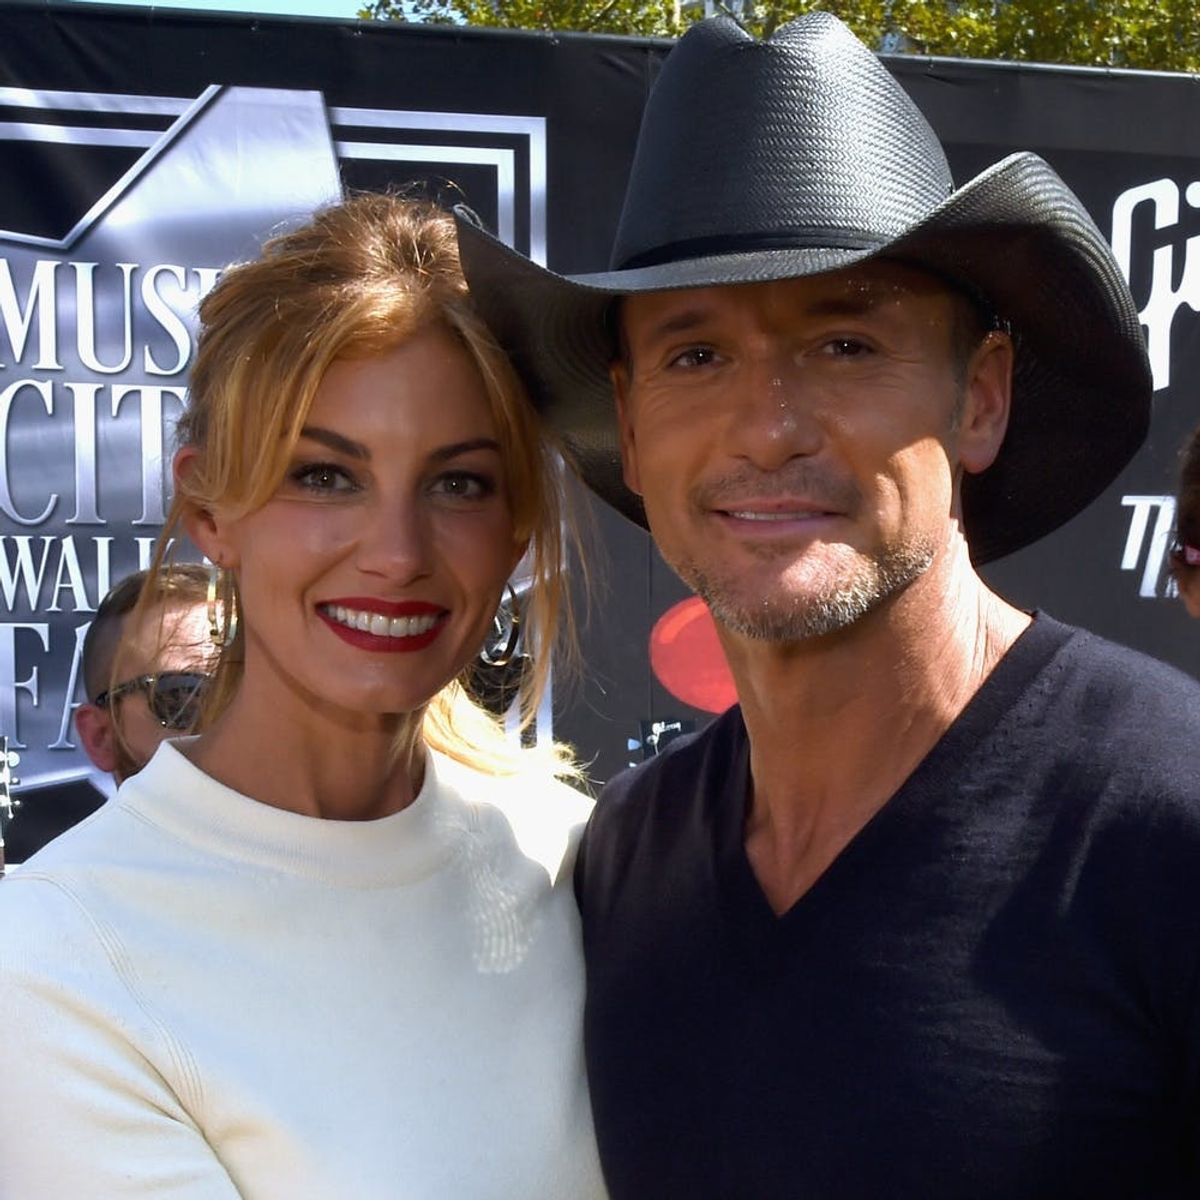 This Is the Super Sweet Story Behind Faith Hill’s 20th Anniversary Message to Tim McGraw